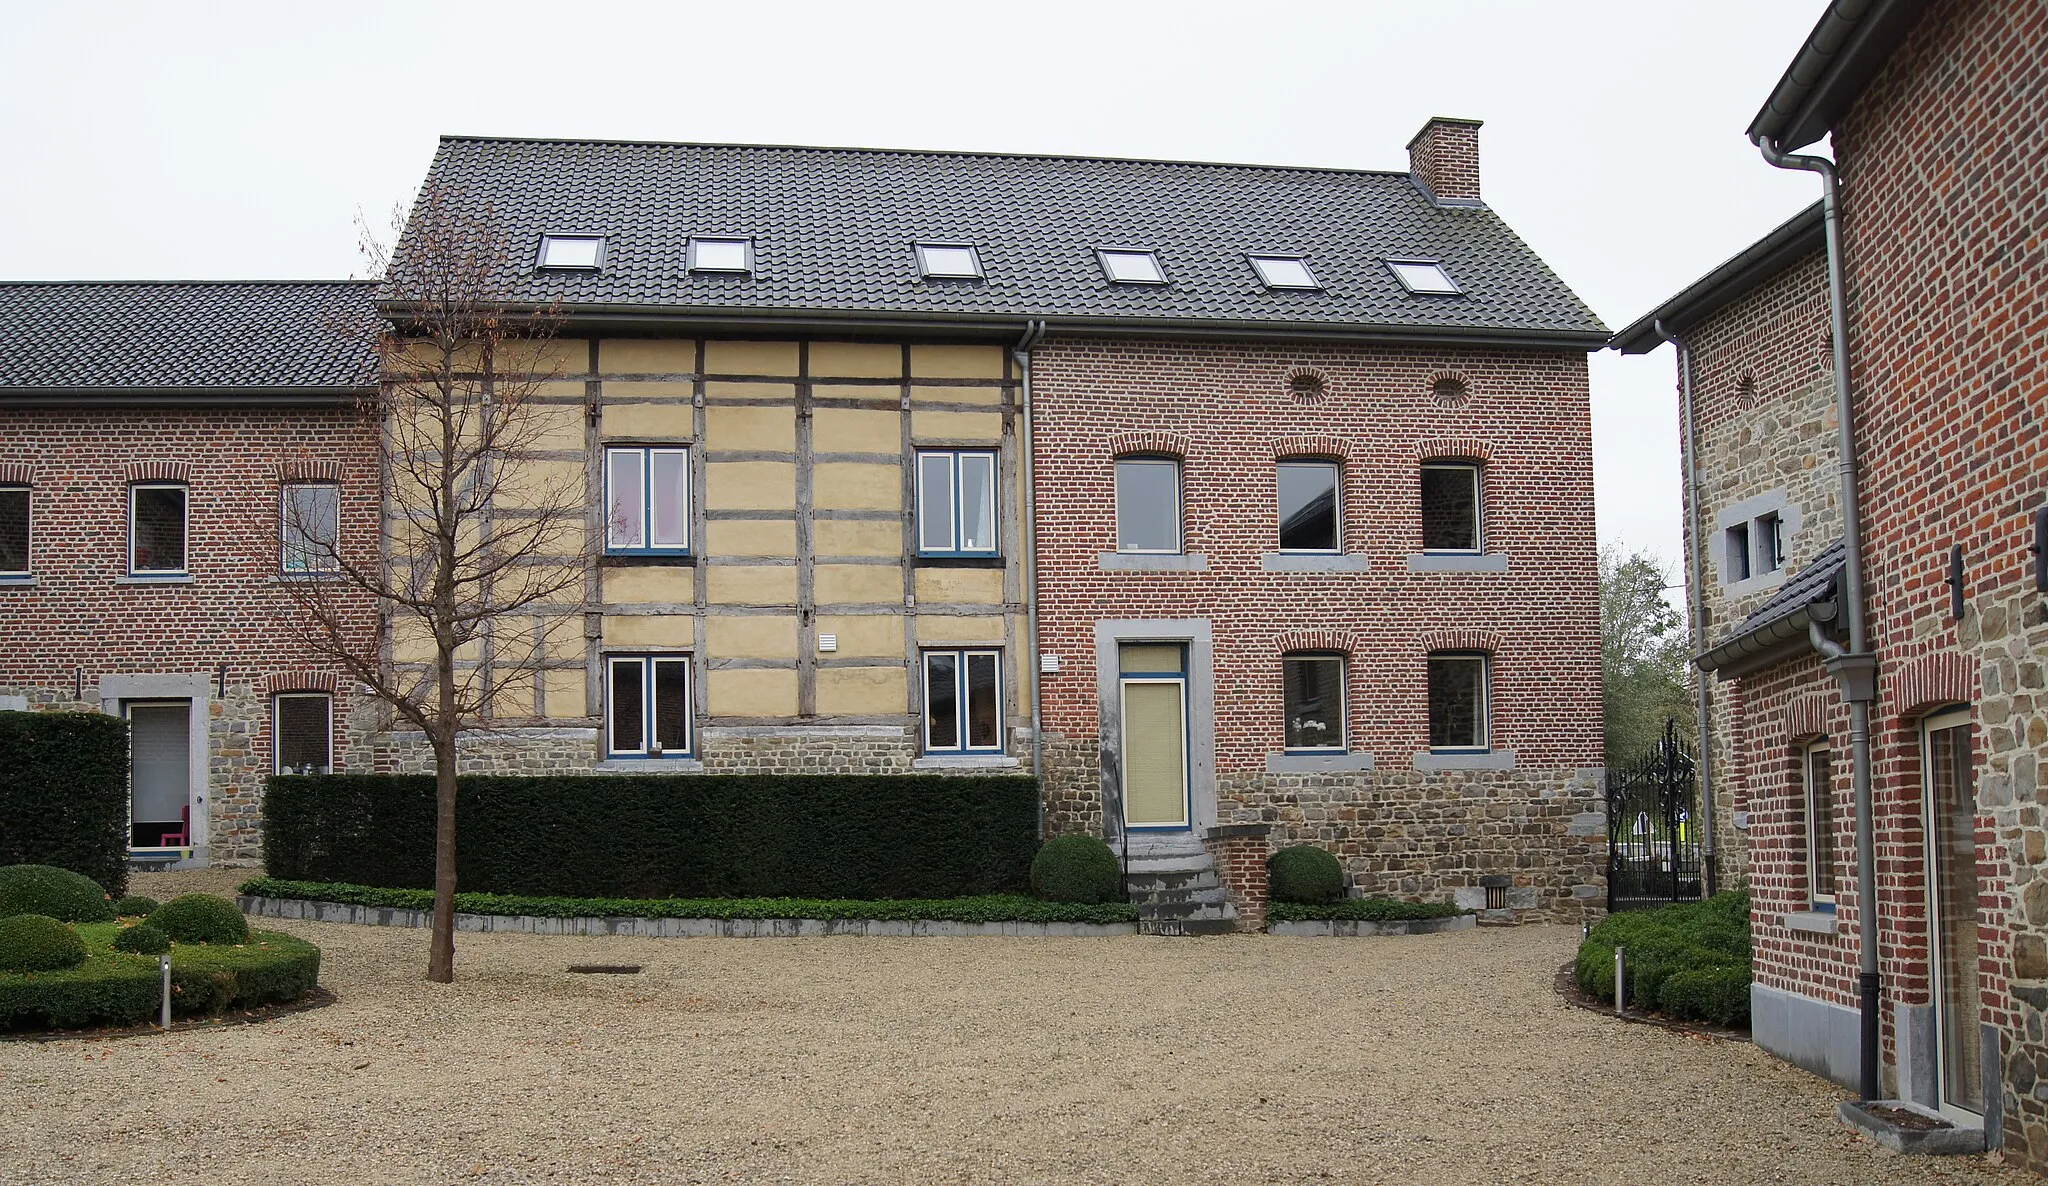 Photo showing: Blegny (Trembleur), Belgium: New houses in old Court Yard